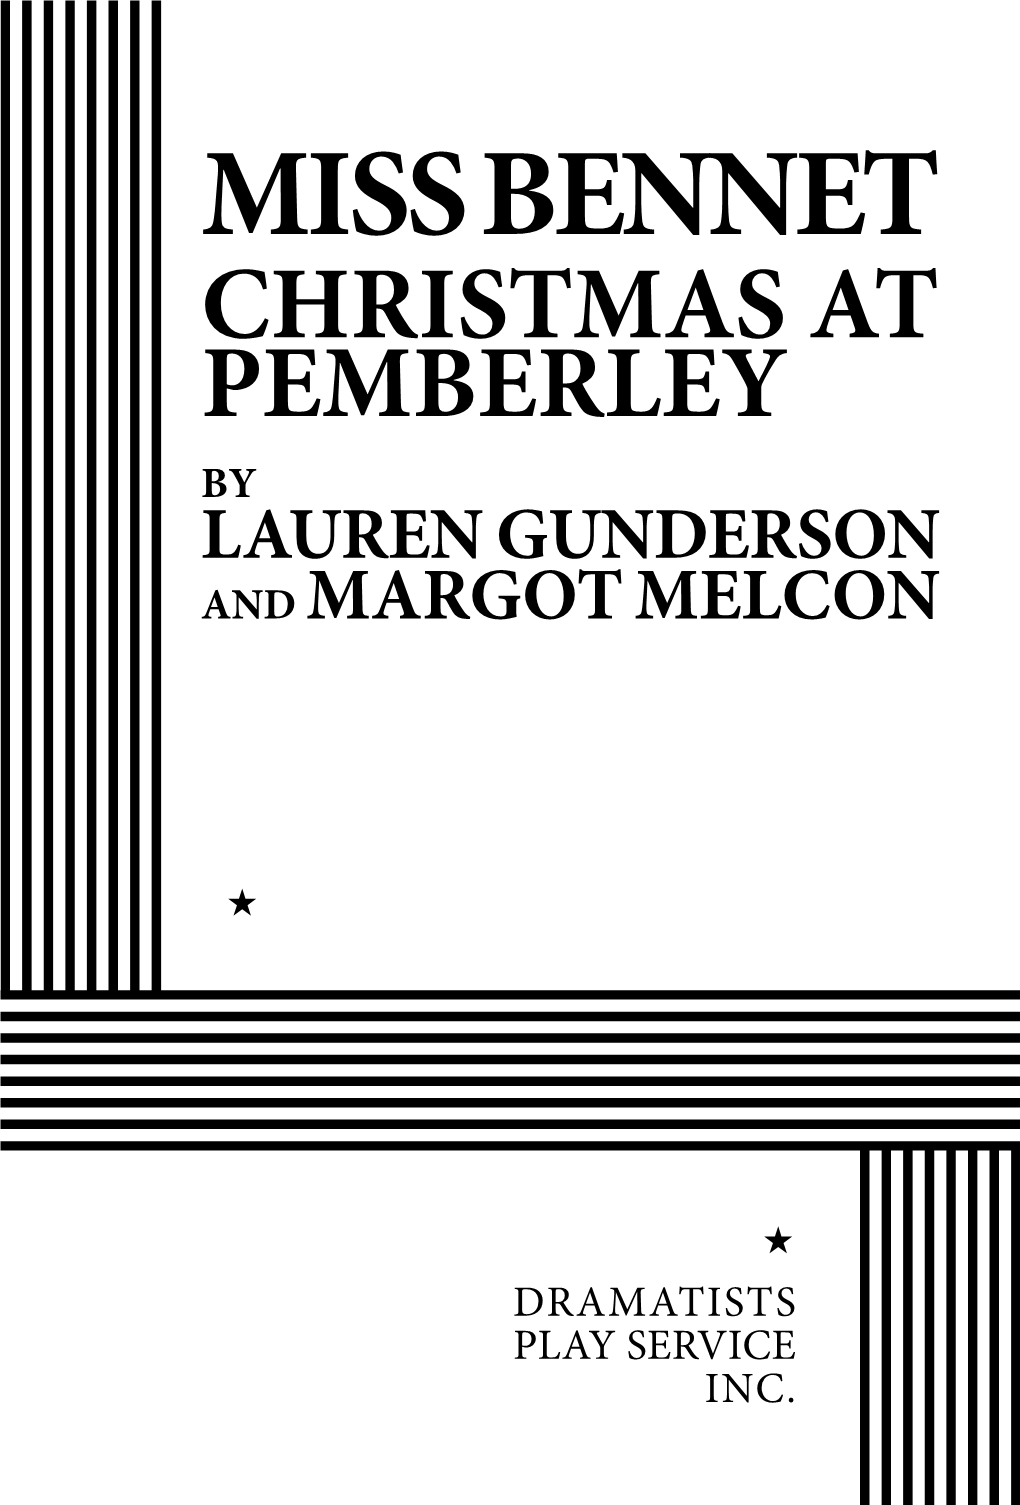 Miss Bennet Christmas at Pemberley by Lauren Gunderson and Margot Melcon